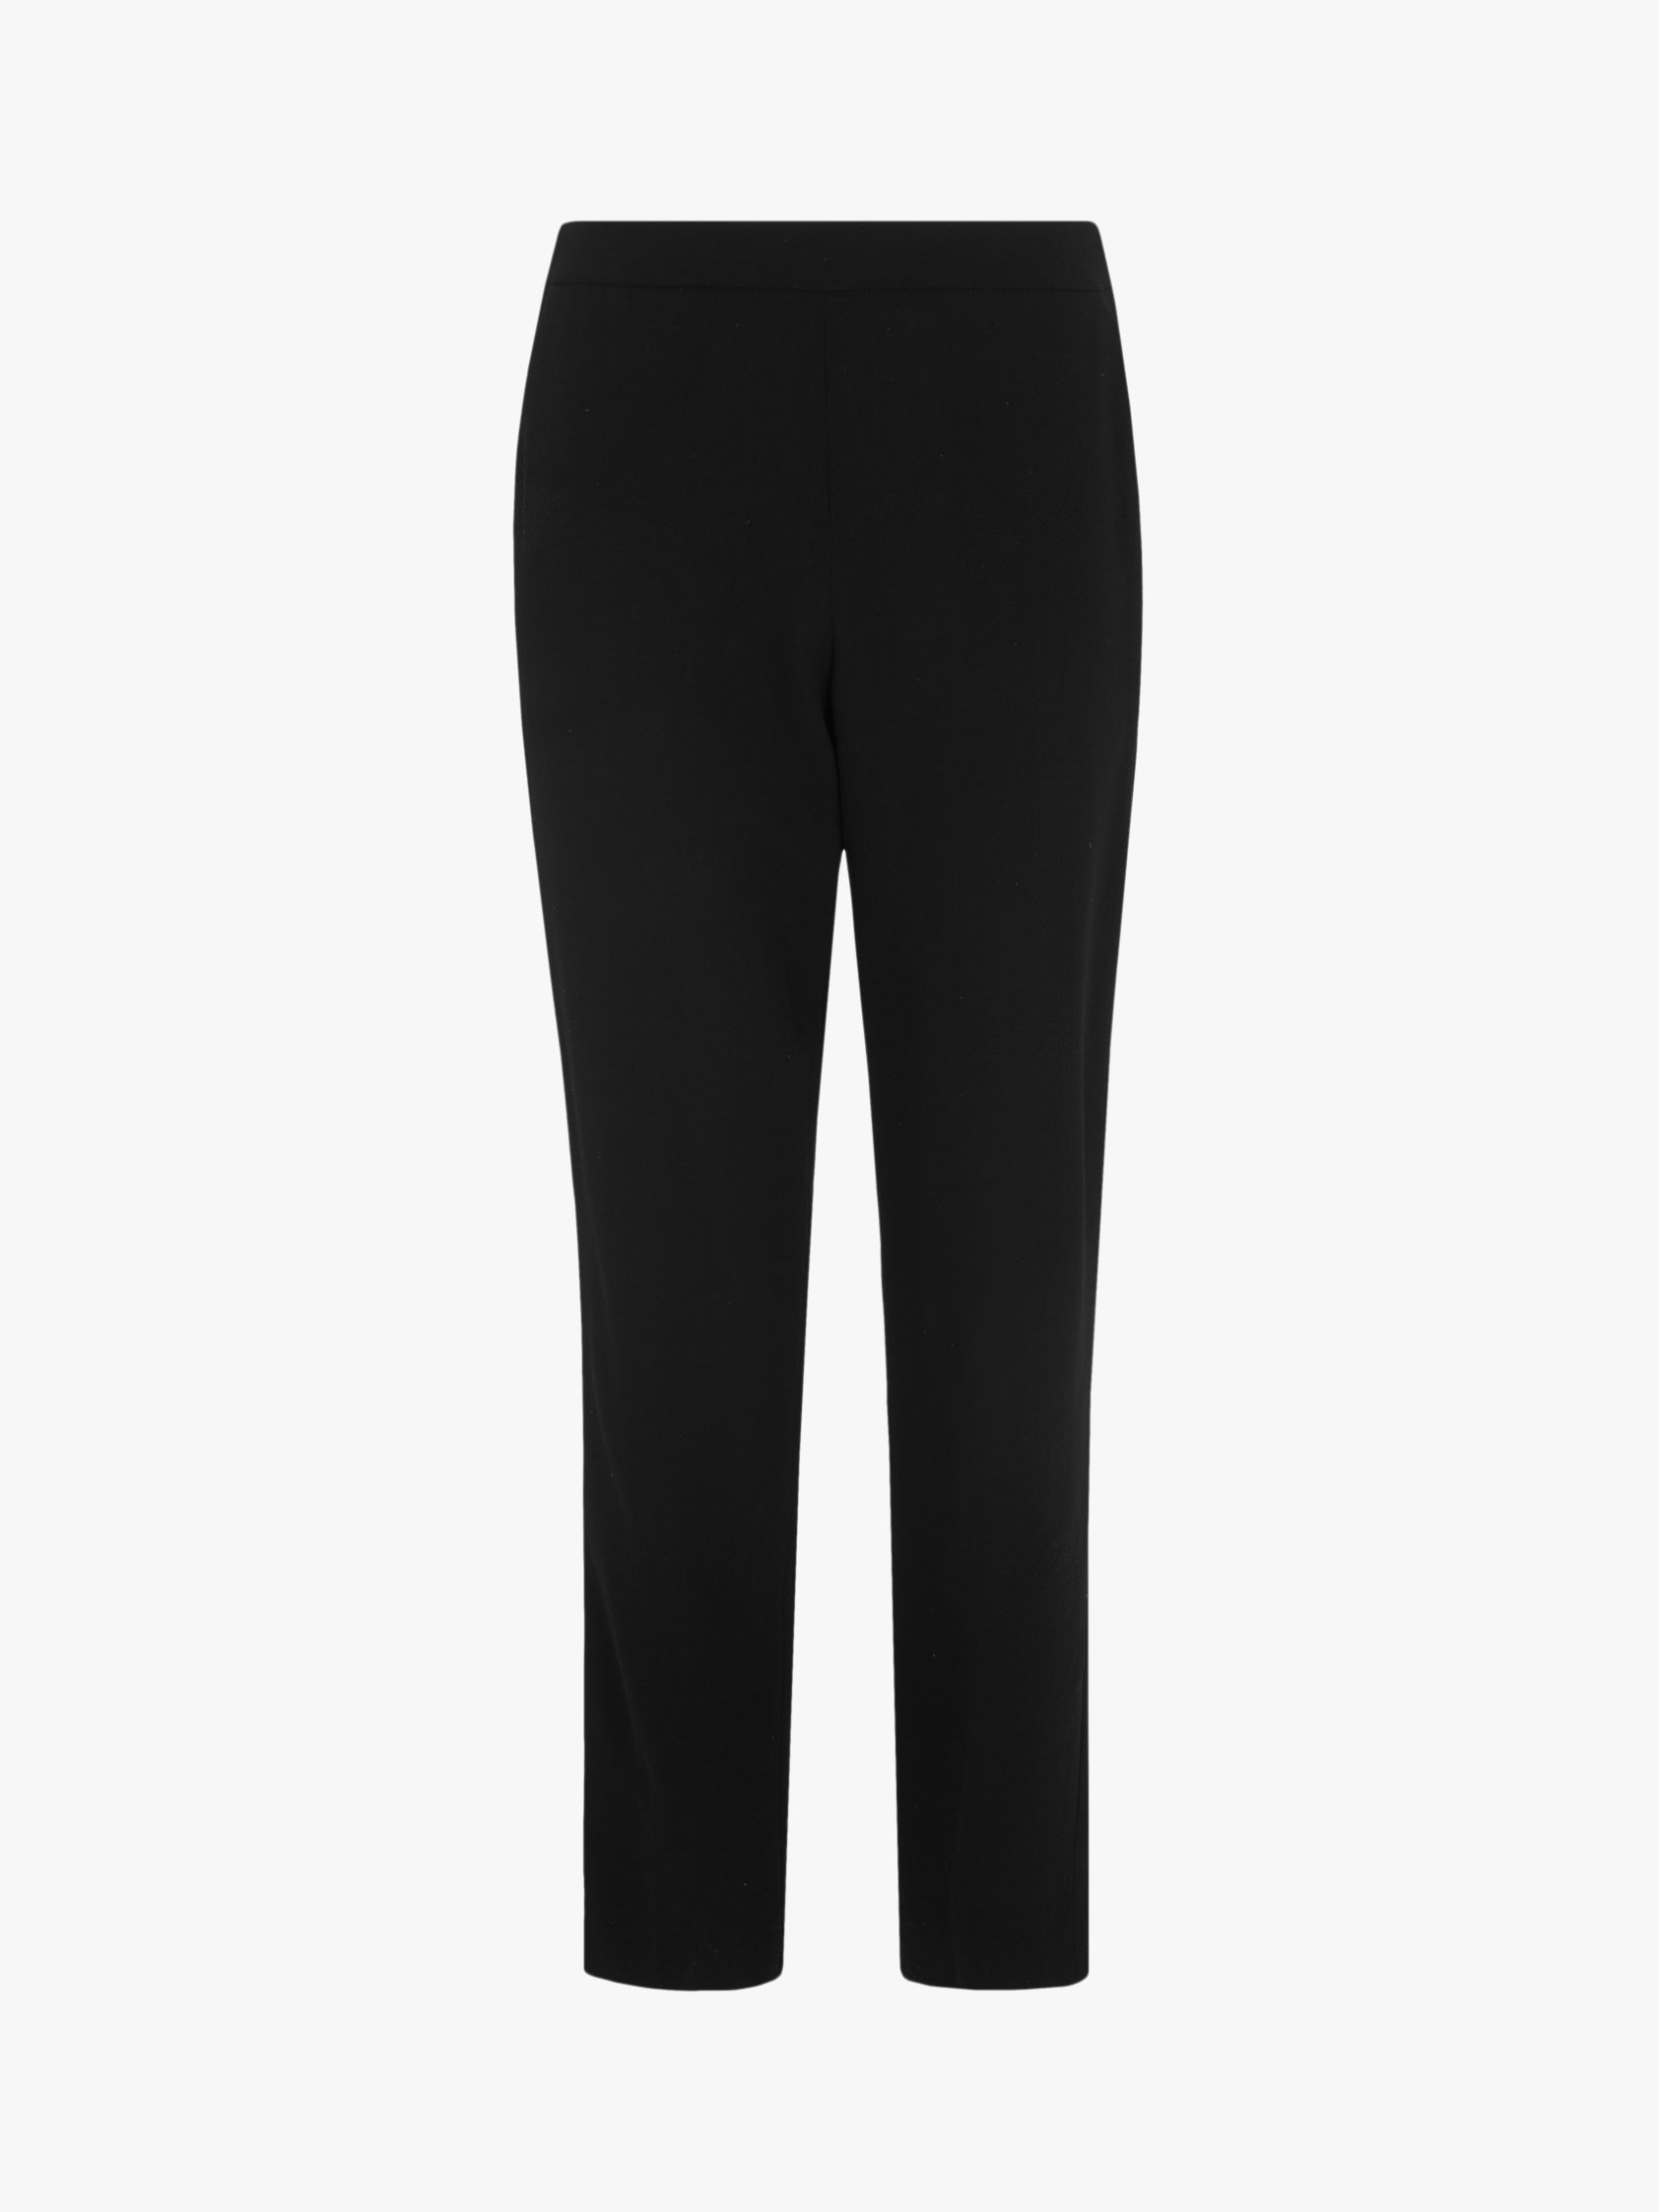 Whistles Anna Elasticated Waist Trousers, Navy at John Lewis & Partners